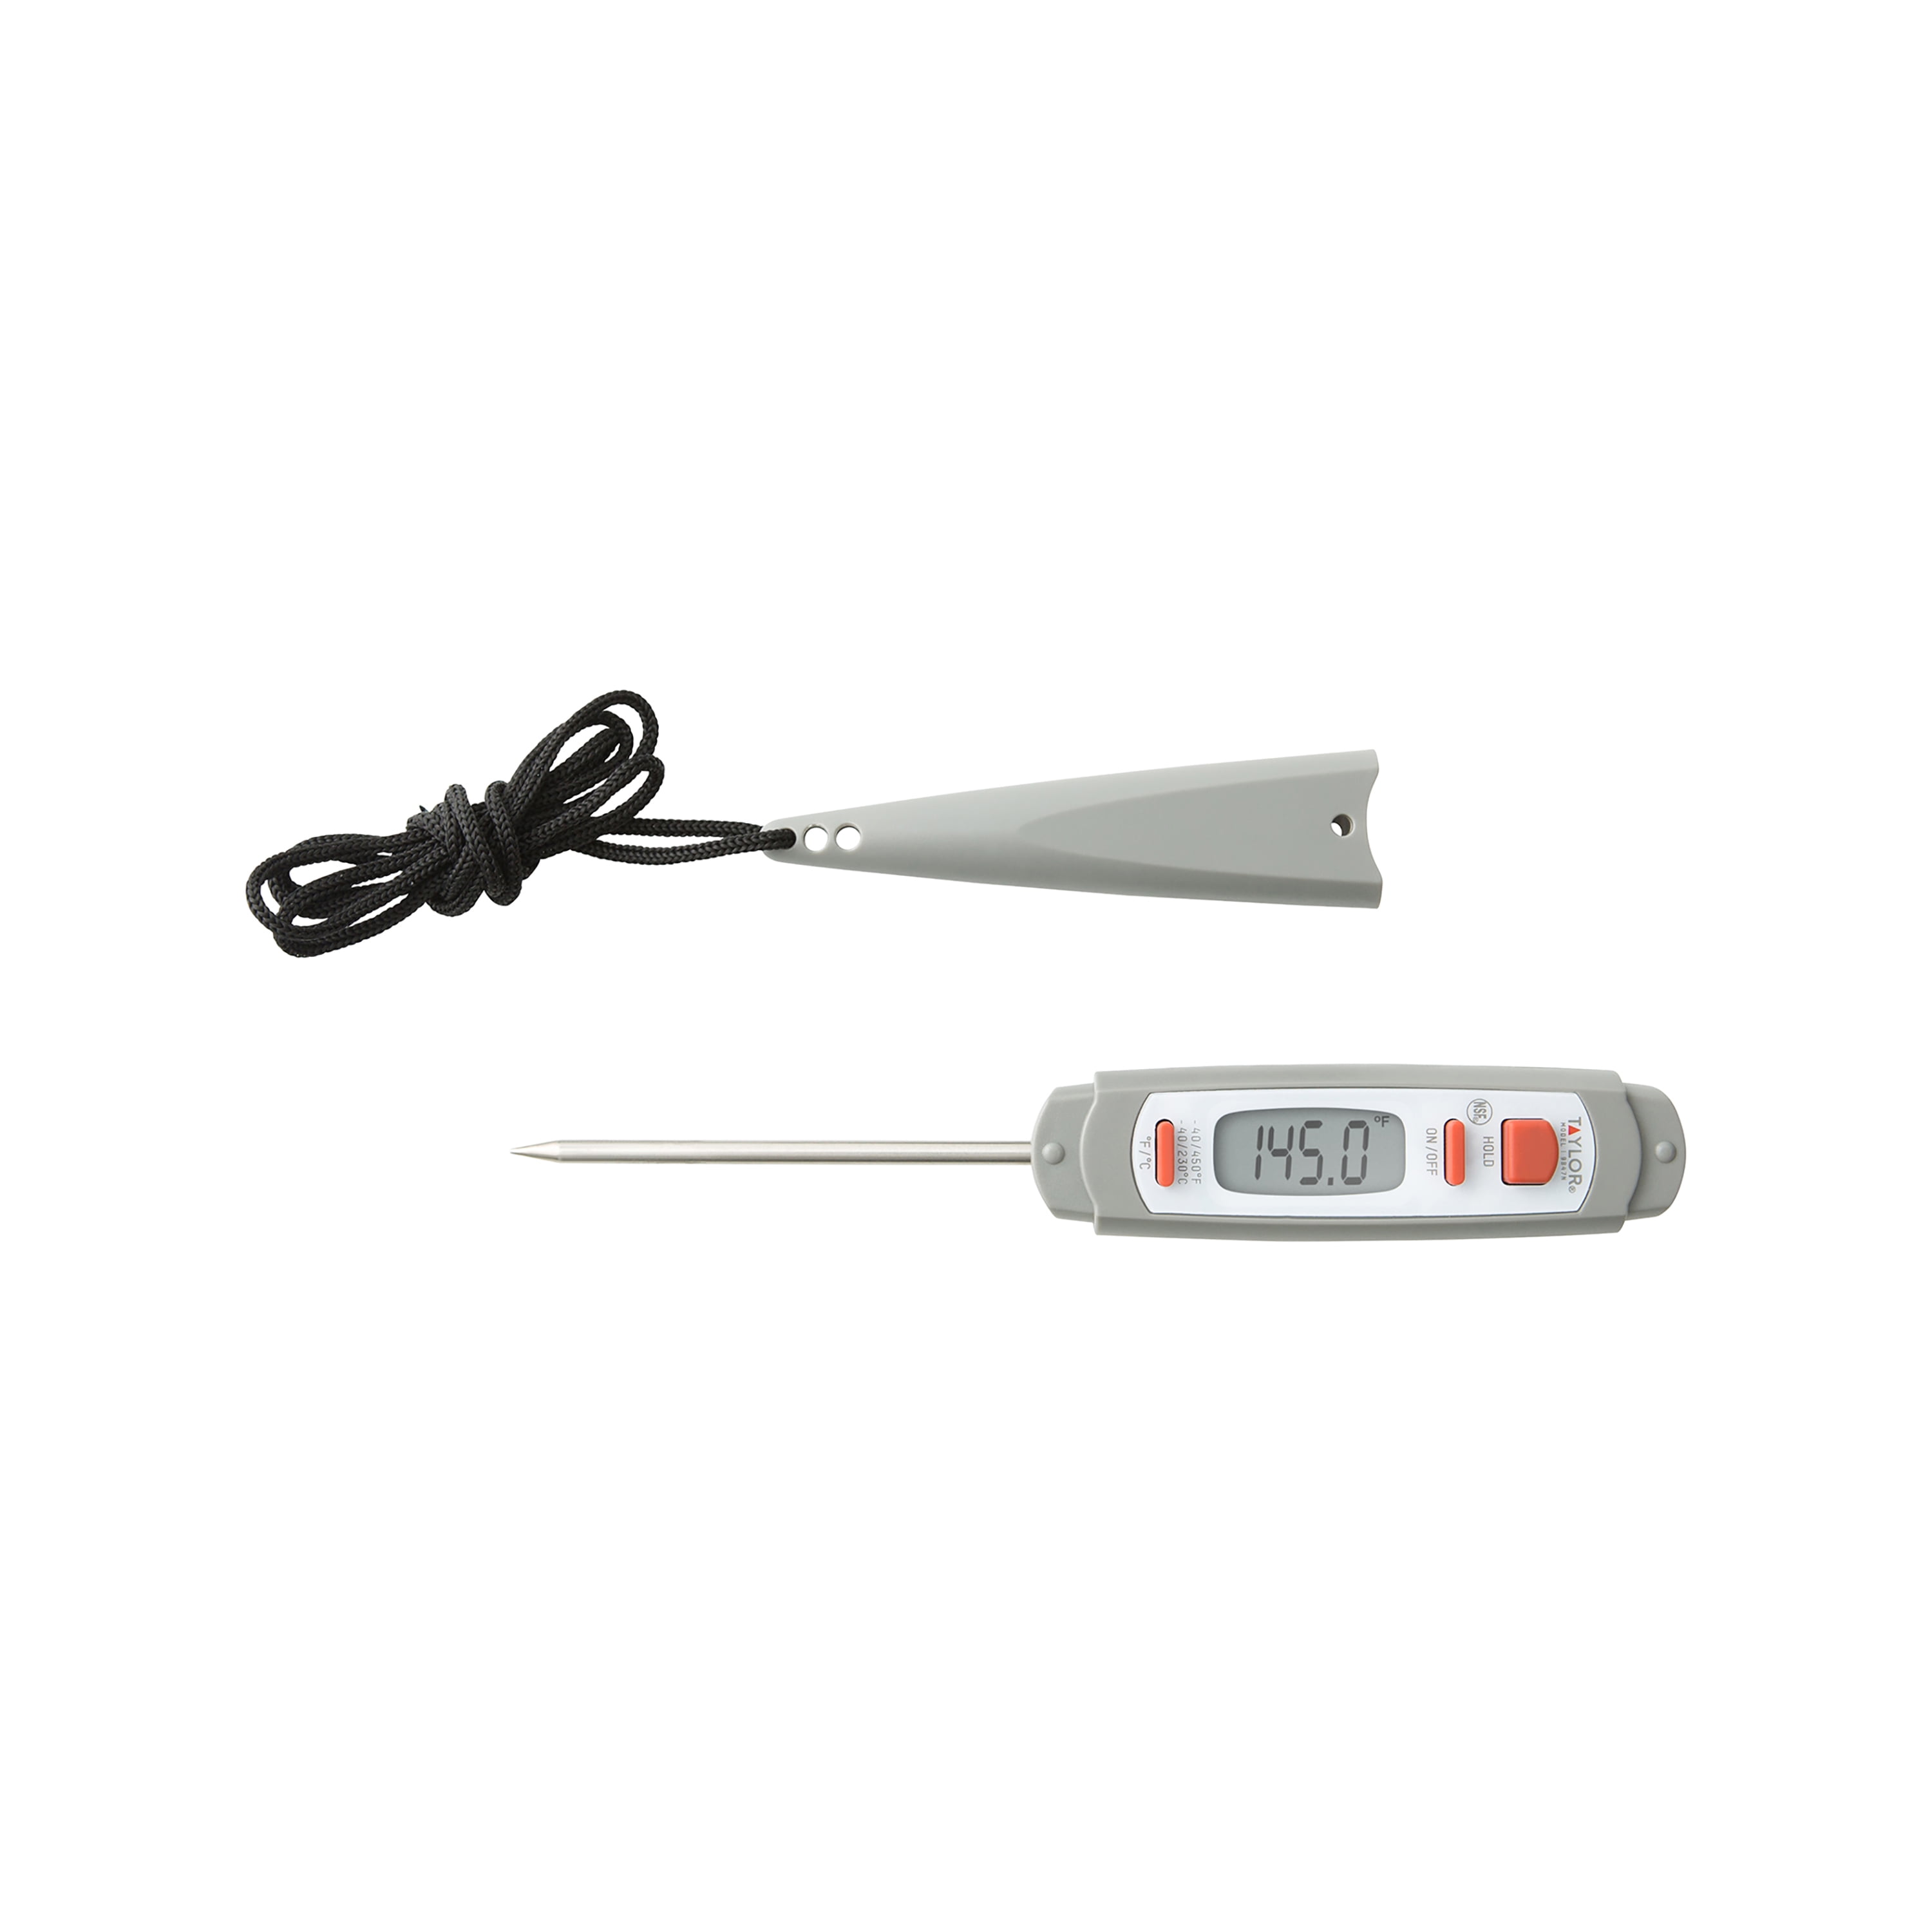 YHDSN Portable Cooking and Candy Spatula Digital Thermometer for Chocolate  Jams Caramel Yogurt Creams Syrup Sauce Food Baking BBQ, Instant Temperature  Reader & Stirrer in One 